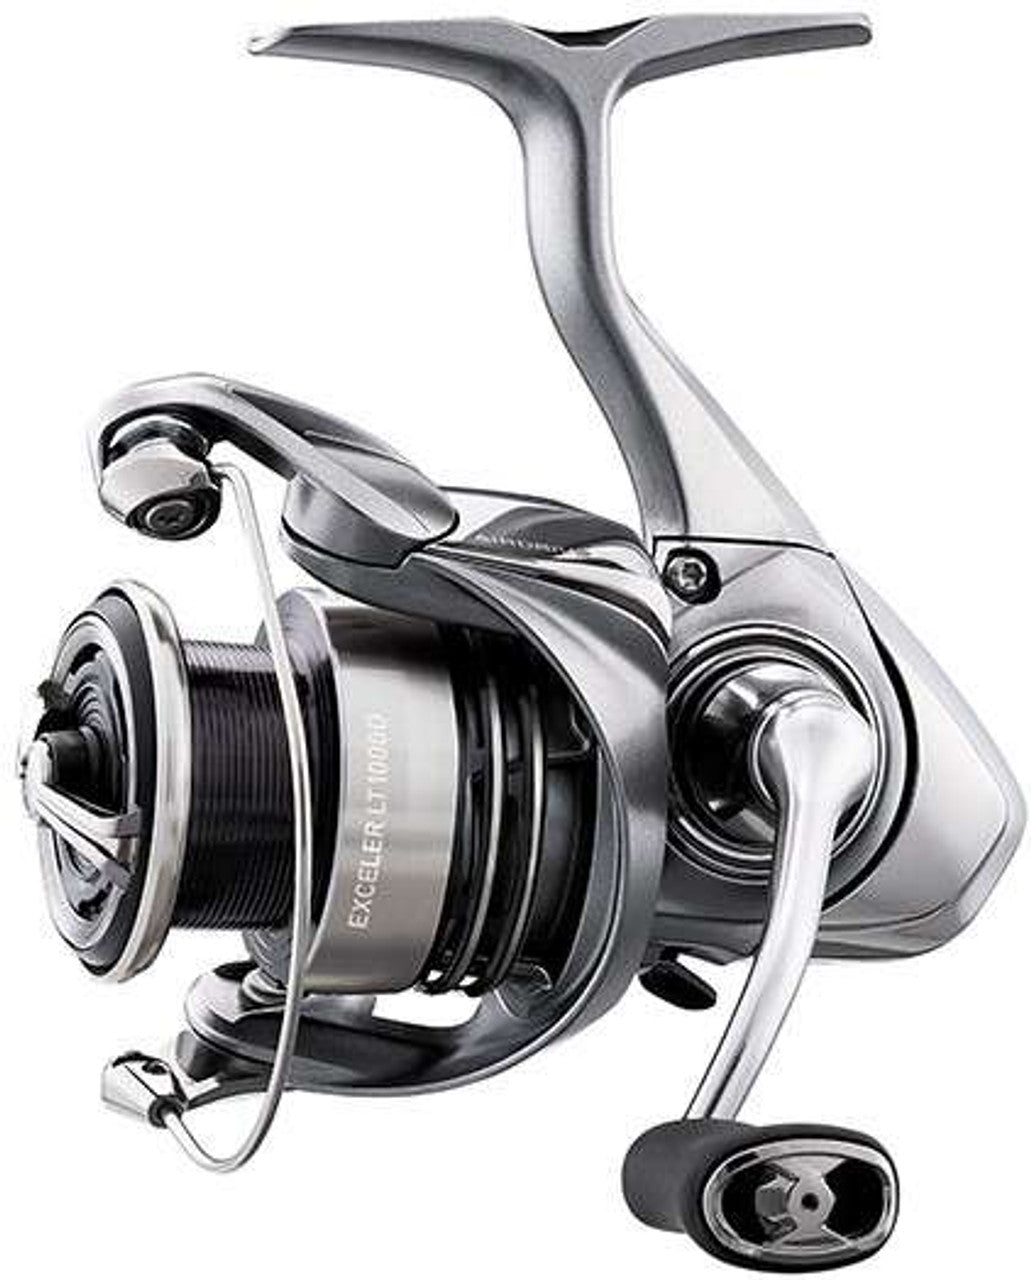 Sure Southern Outdoors - The all new Tatula Elite Spinning reel has arrived  at the shop. Come checkout the 2500 reel size at the shop today! You won't  be disappointed!